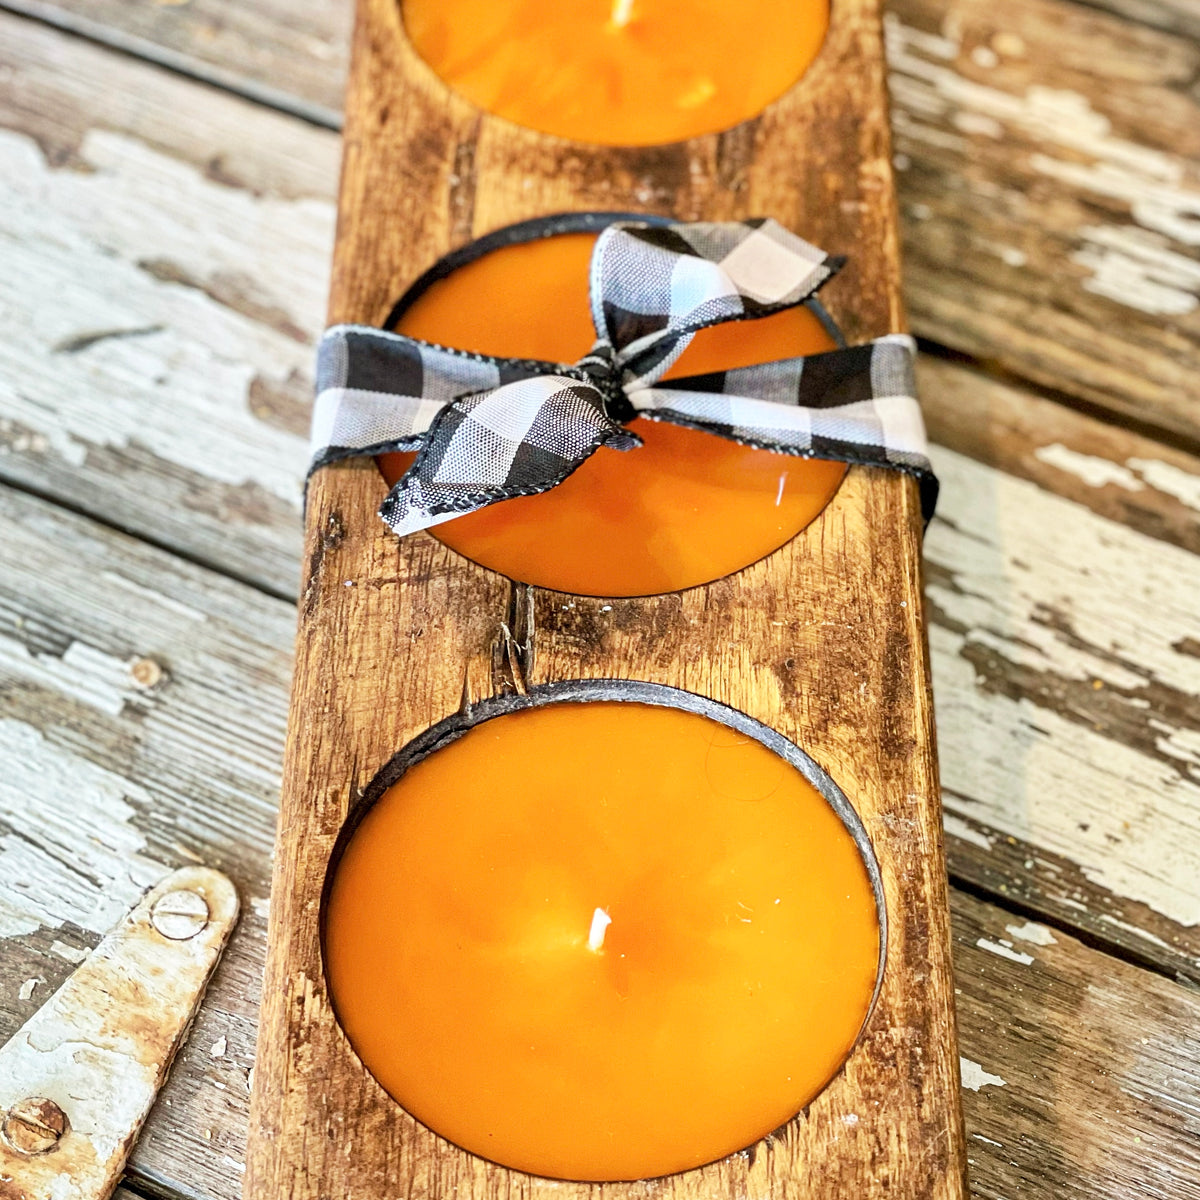 Cheese Mold Candles